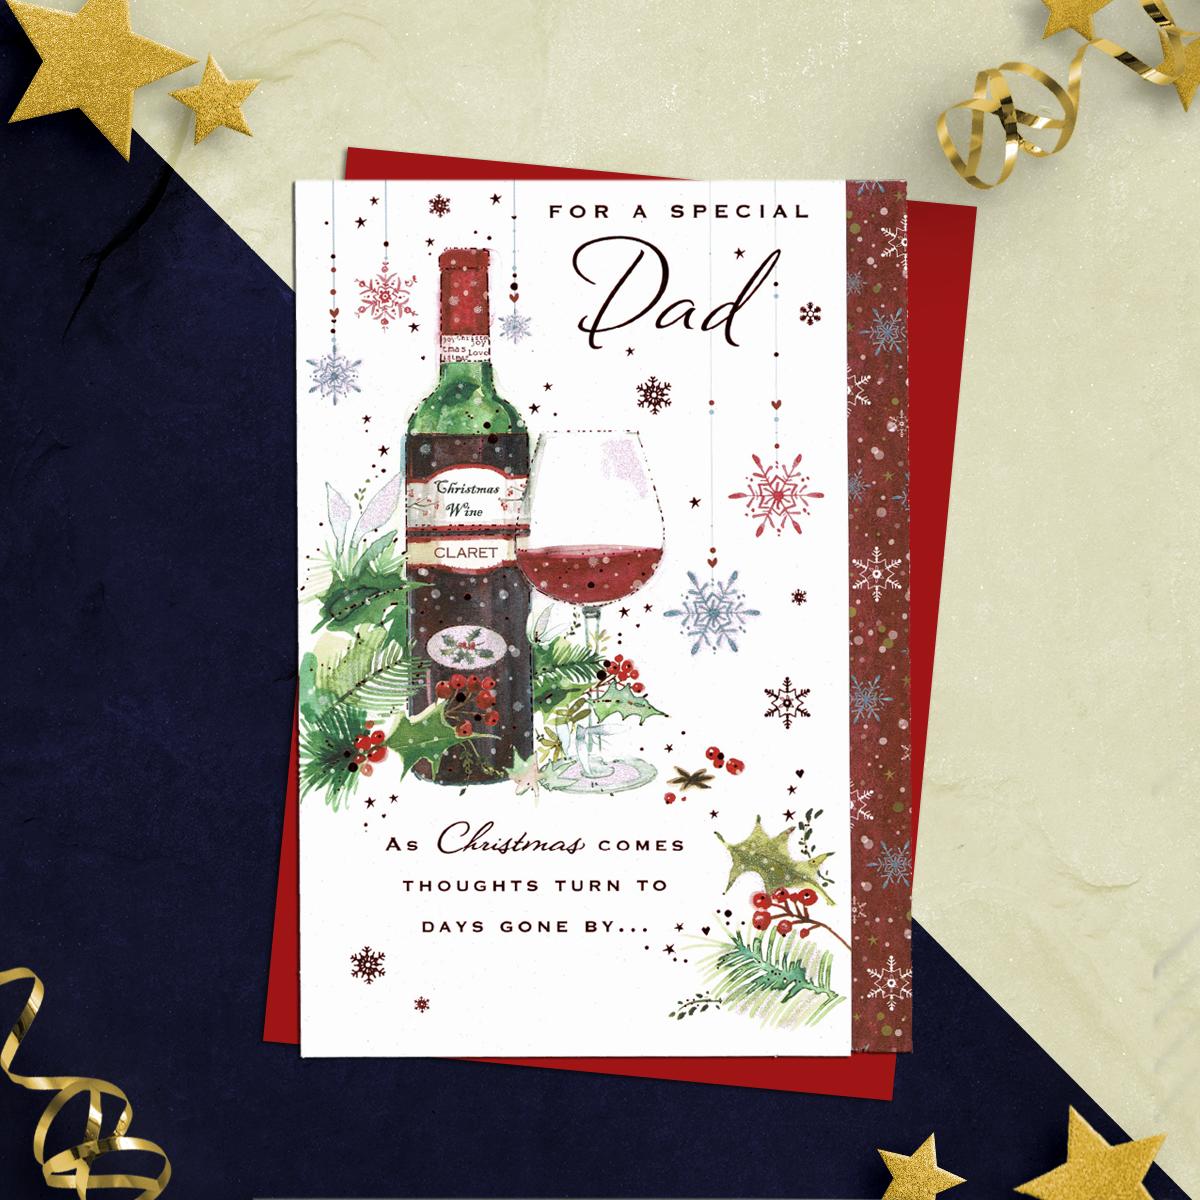 Special Dad Red Claret Wine Christmas Card Alongside Its Red Envelope